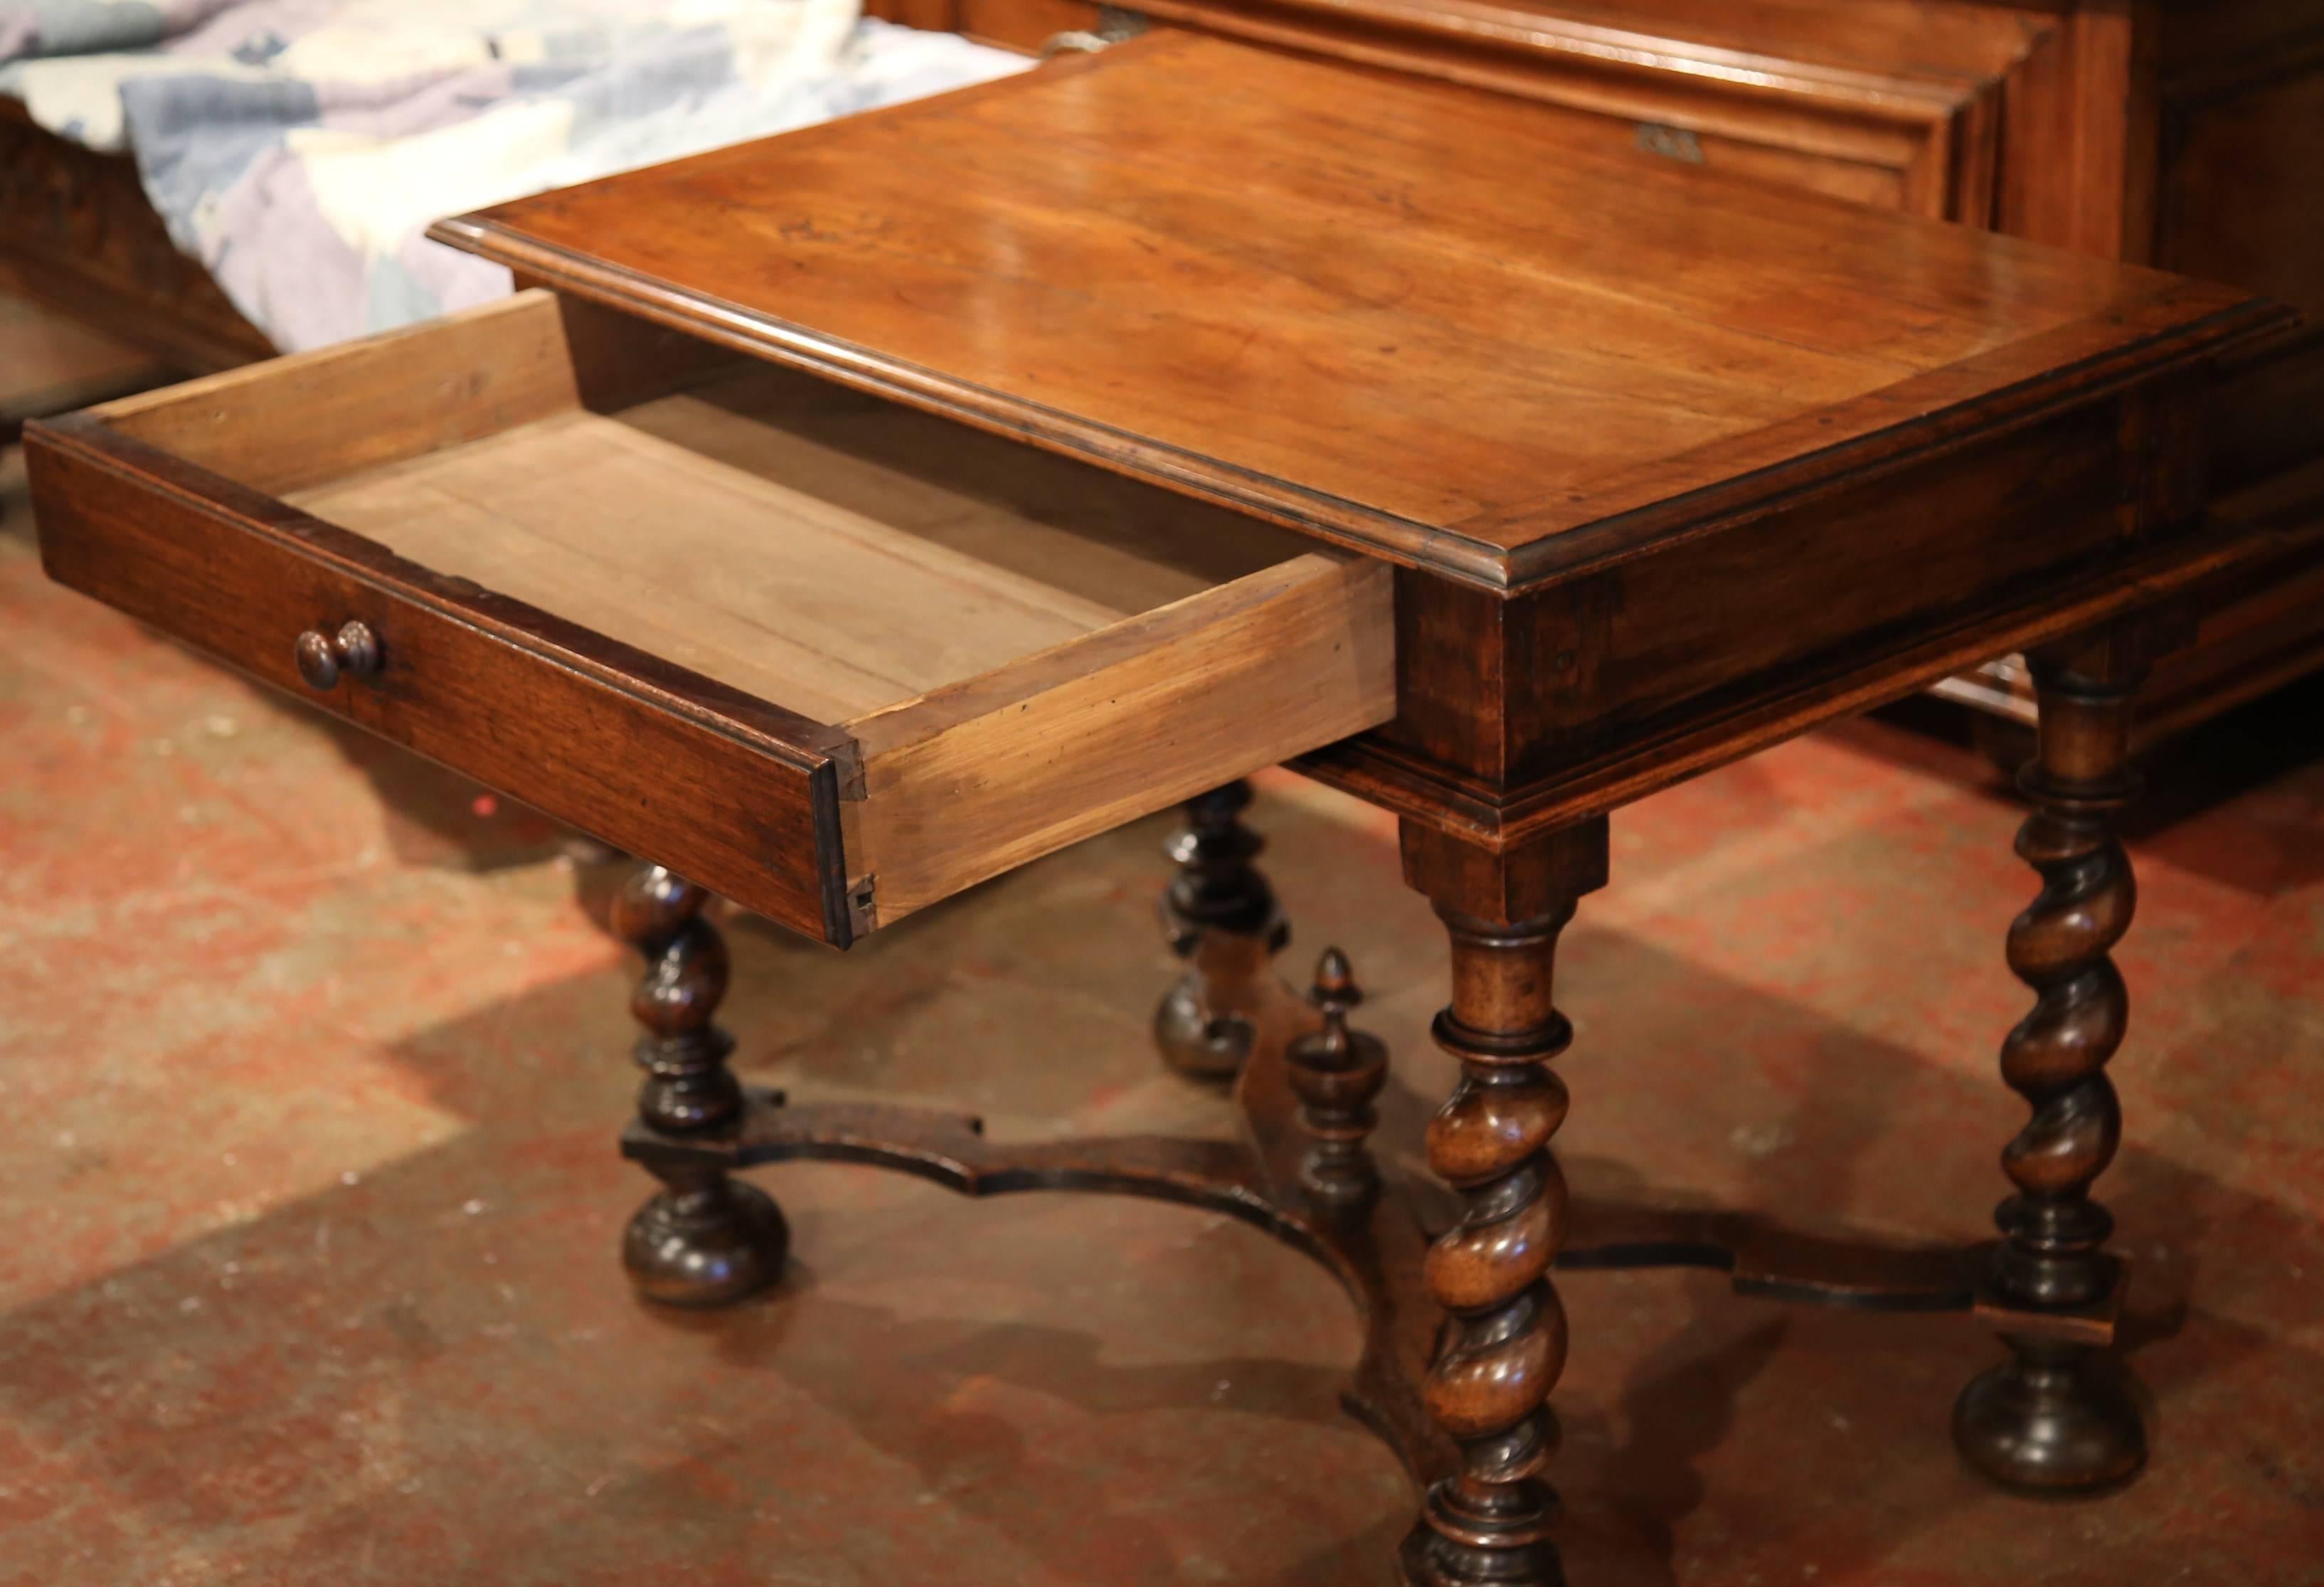 Hand-Carved 18th Century, French, Louis XIII Carved Walnut Table Desk with Barley Twist Legs